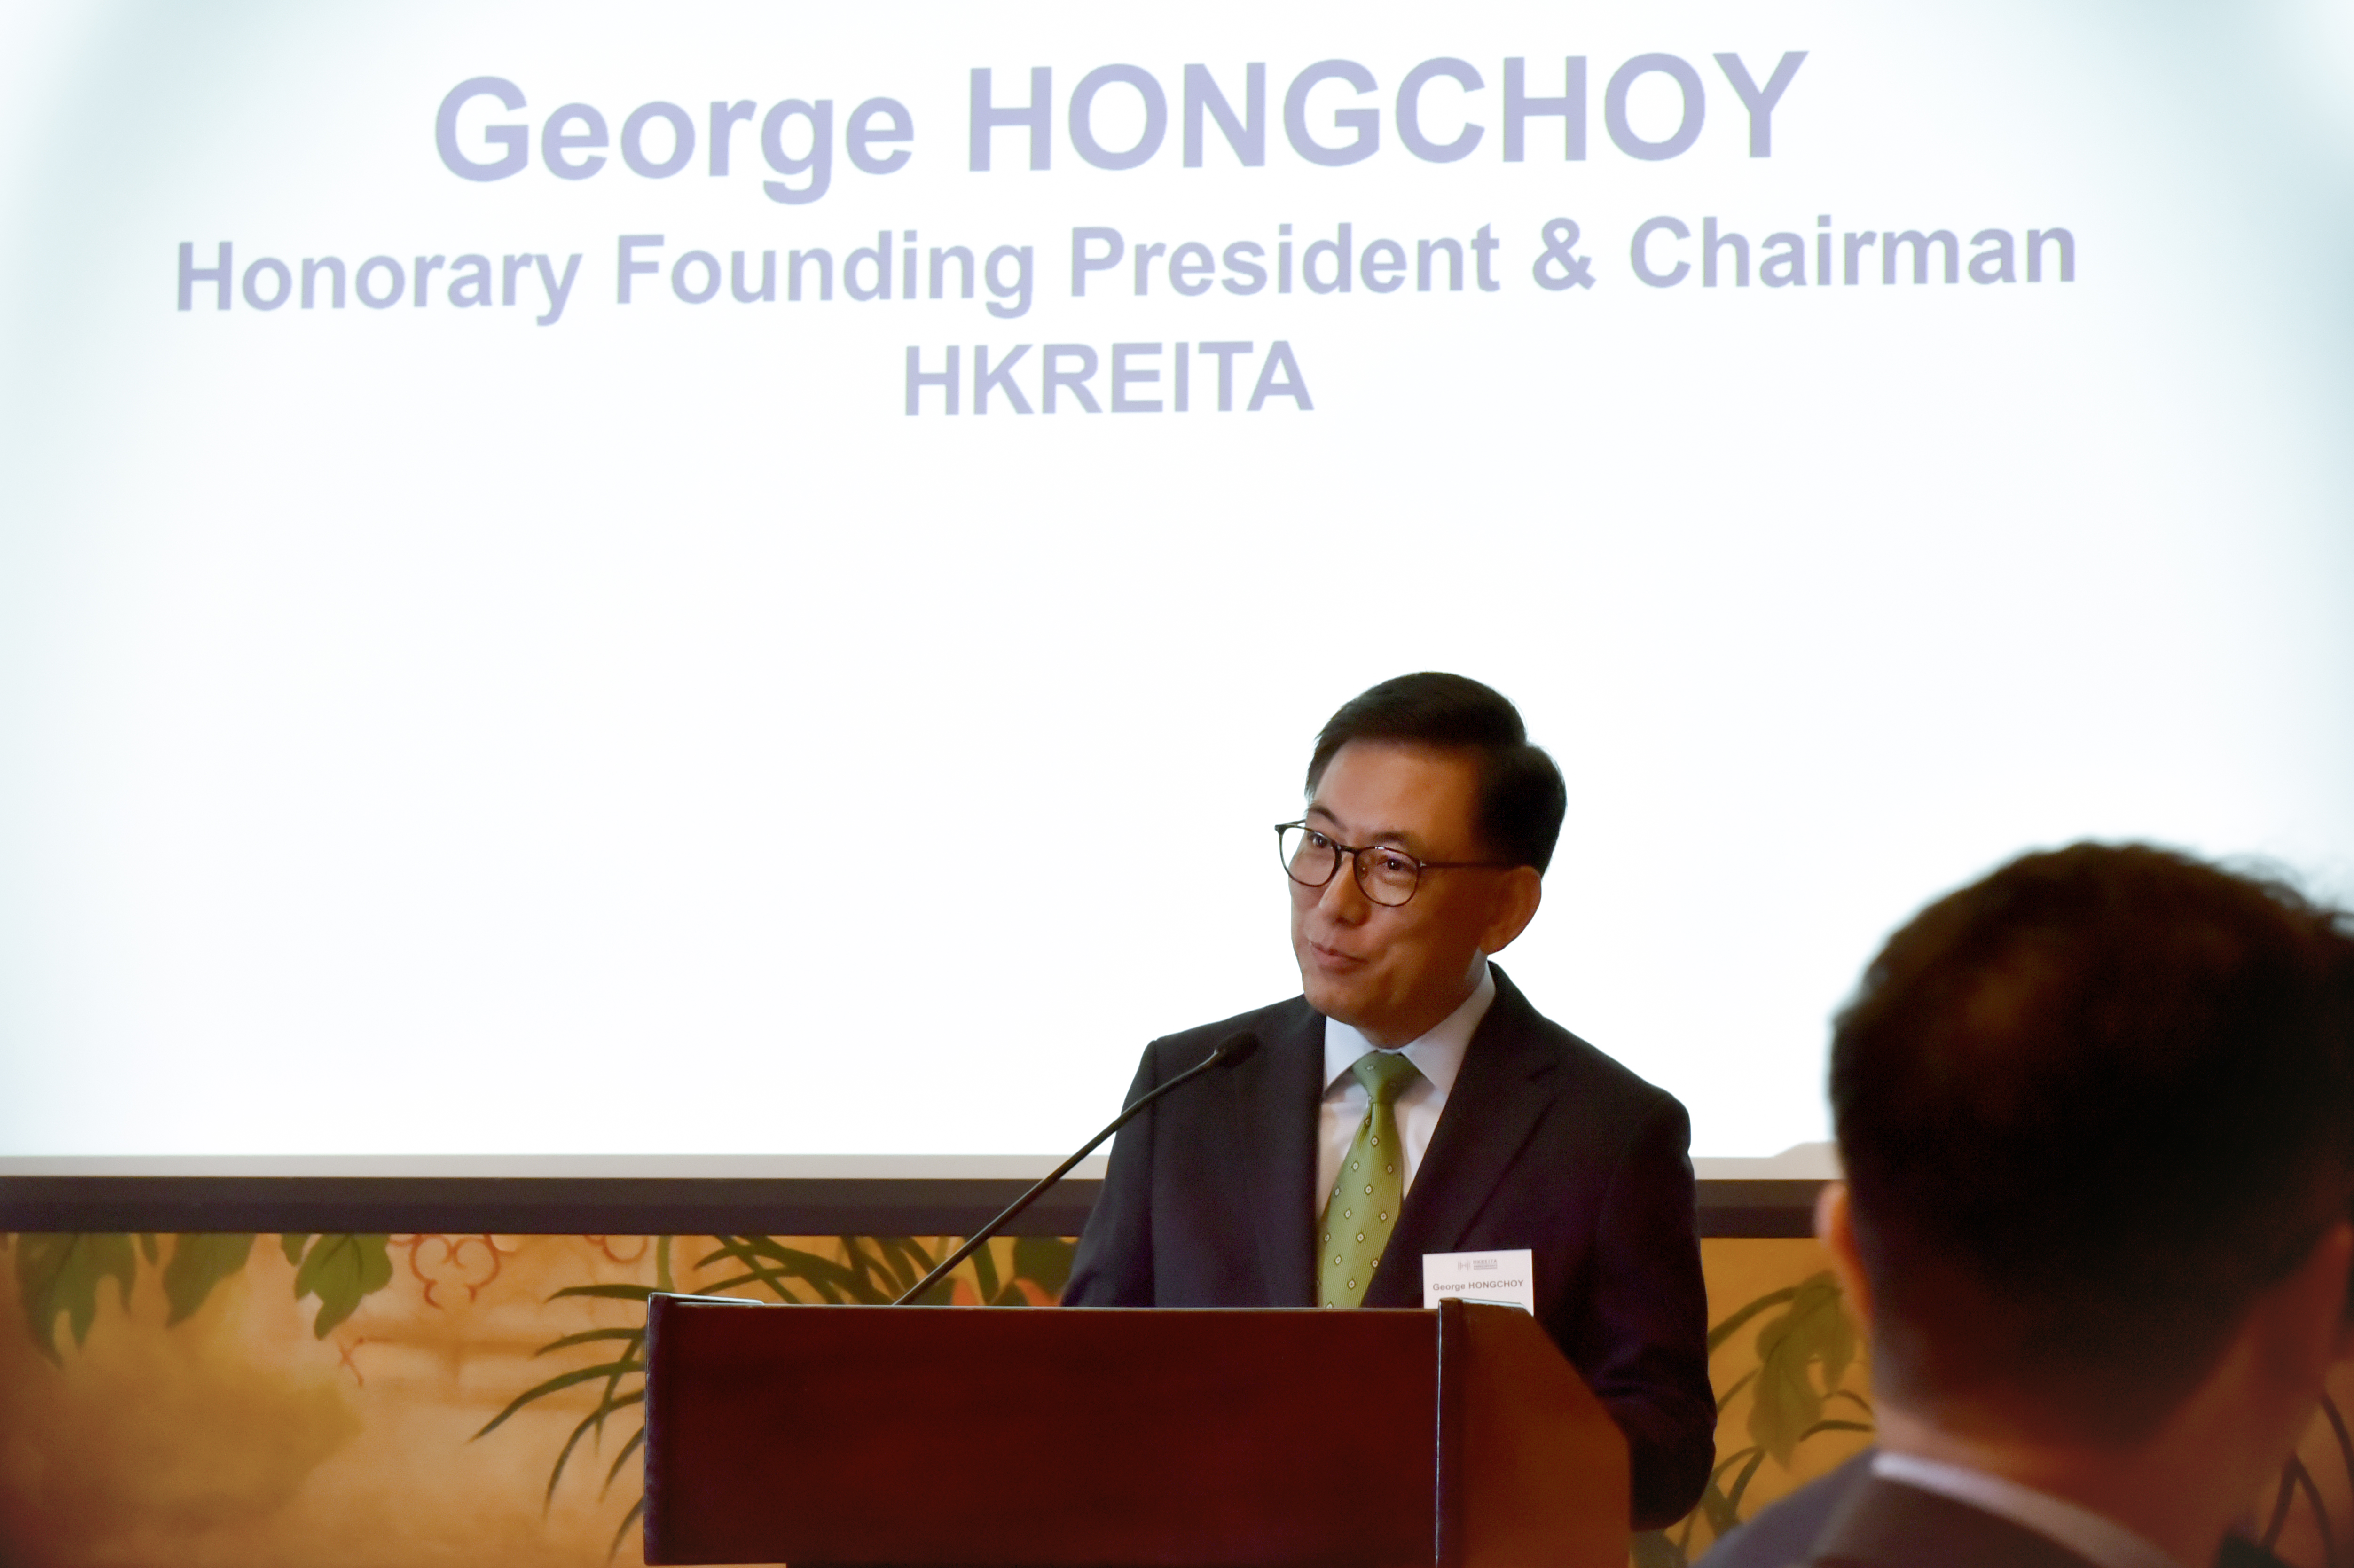 In his welcome remarks, HKREITA Chairman George Hongchoy reiterated the Association’s objective of building a collaborative platform for industry players to jointly promote the overall development of the REIT market in Hong Kong, fostering a vibrant and leading REIT market in APAC.